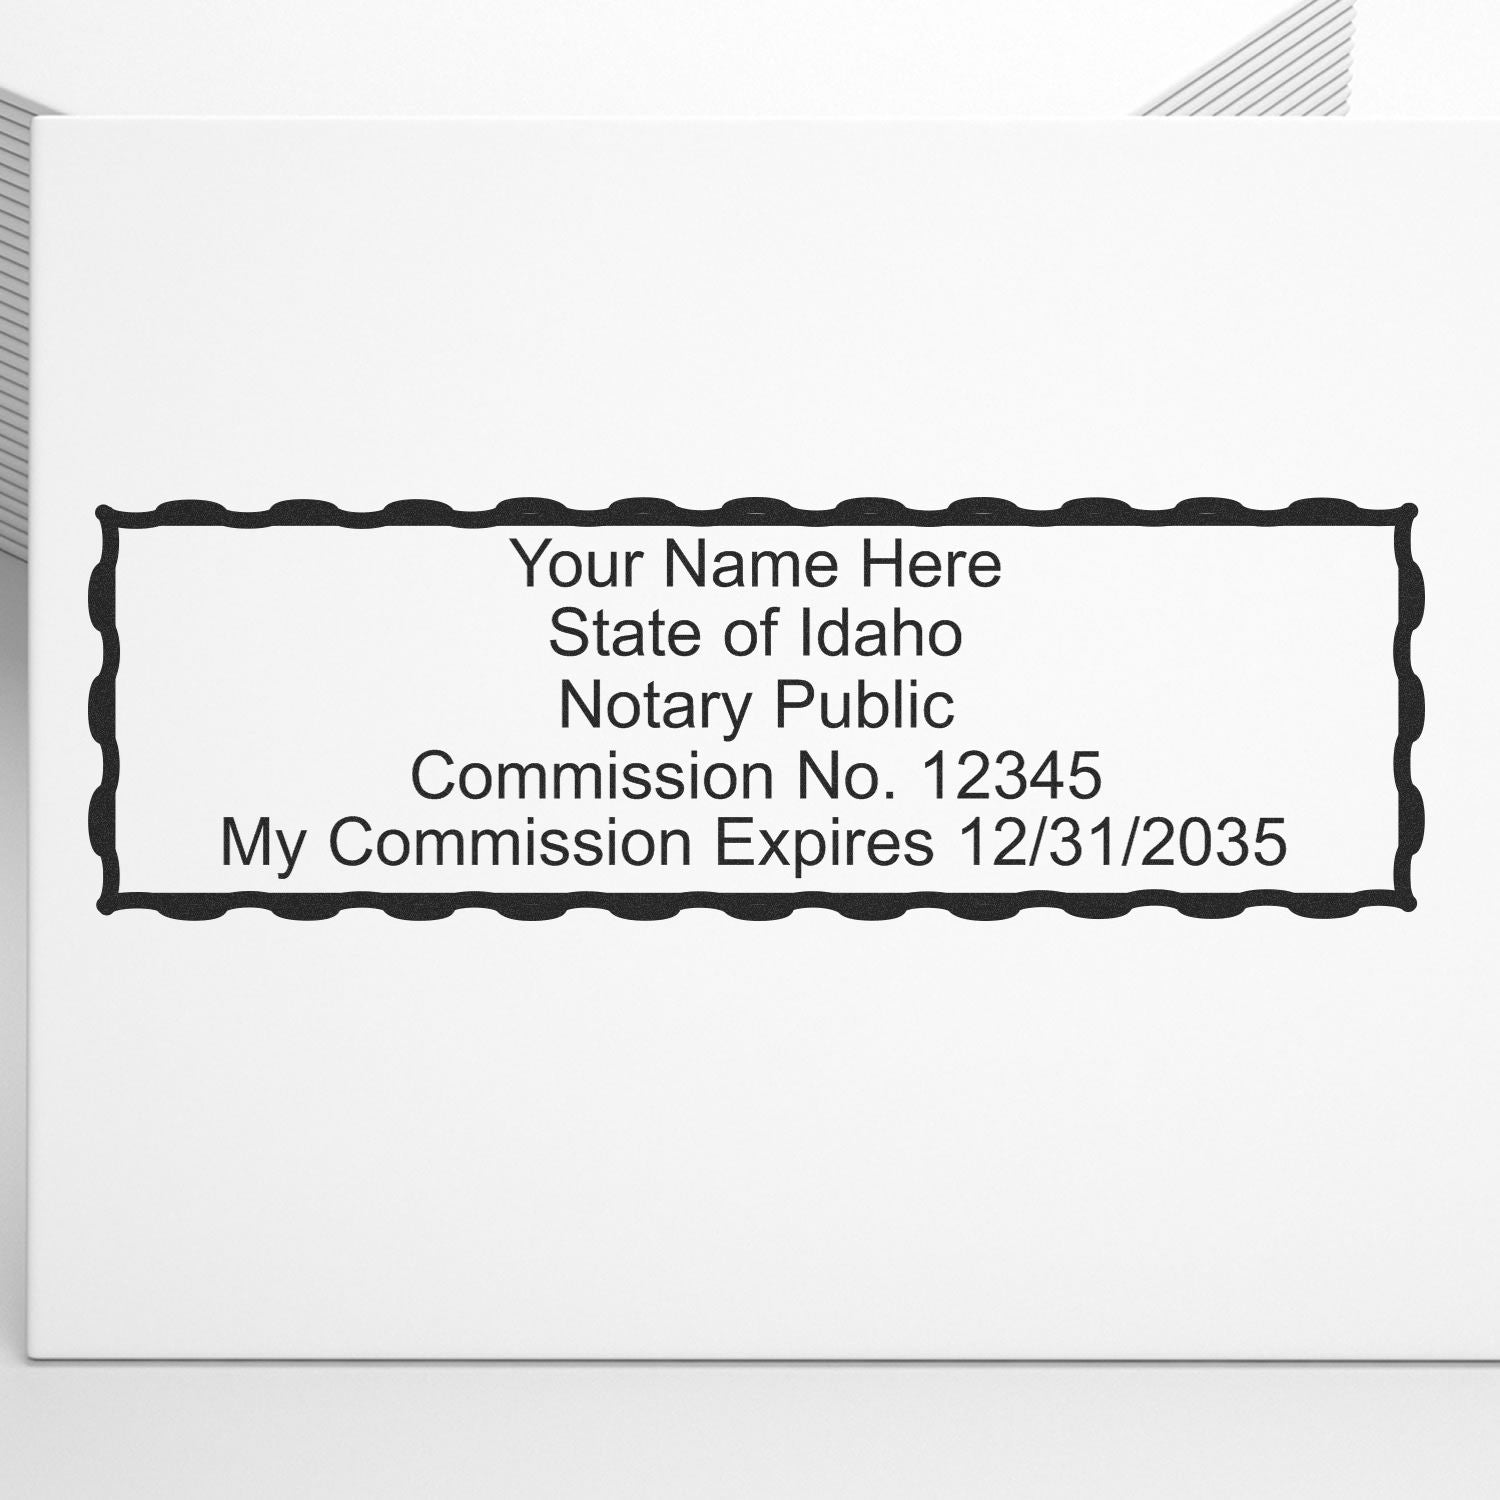 The main image for the Wooden Handle Idaho Rectangular Notary Public Stamp depicting a sample of the imprint and electronic files